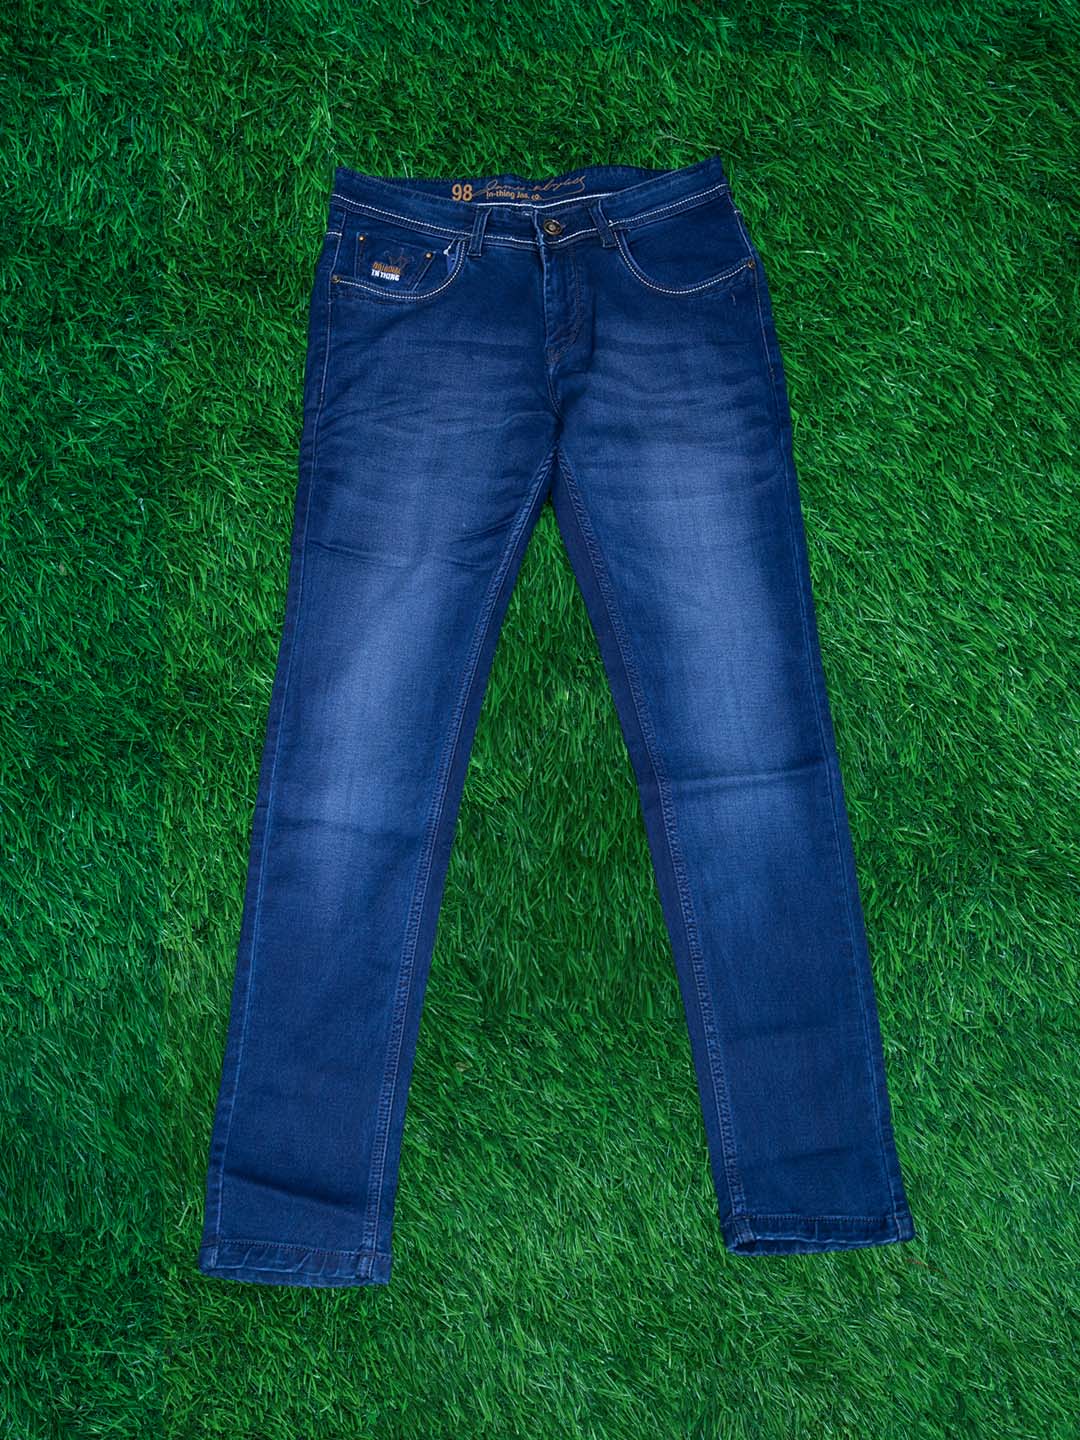 faded-blue-jeans